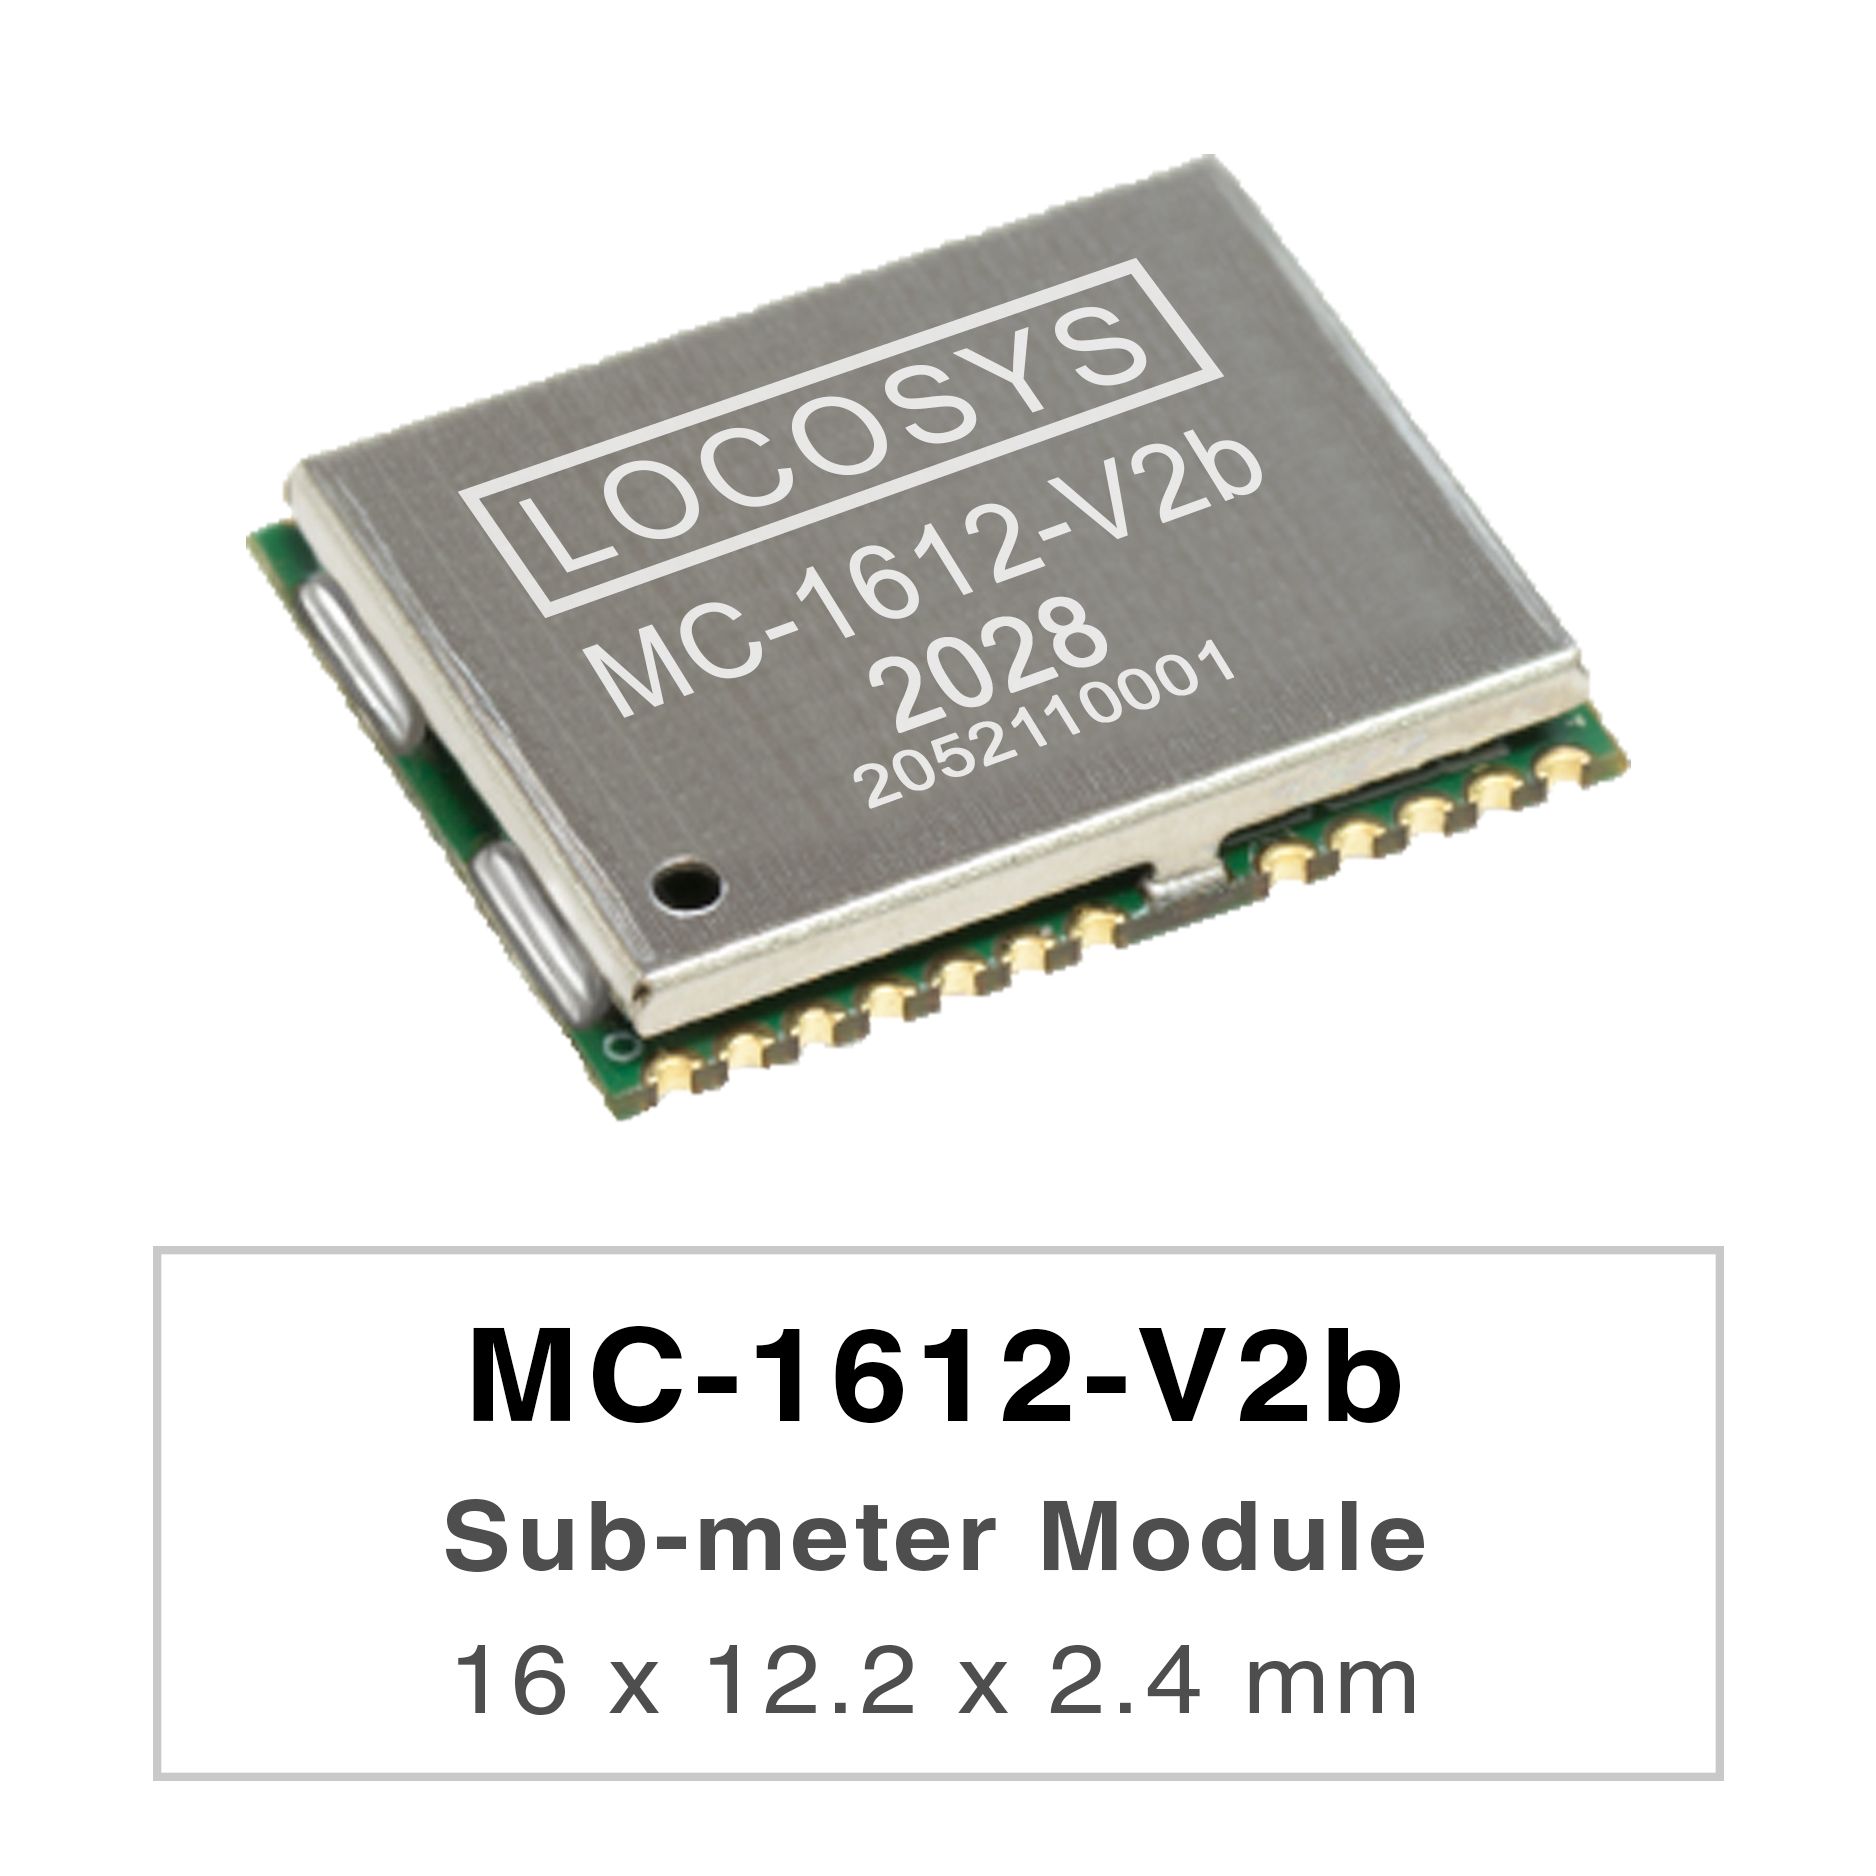 LOCOSYS MC-1612-Vxx series are high-performance dual-band GNSS positioning modules that are
capable of tracking all global civil navigation systems. They adopt 12 nm process and integrate efficient
power management architecture to perform low power and high sensitivity.